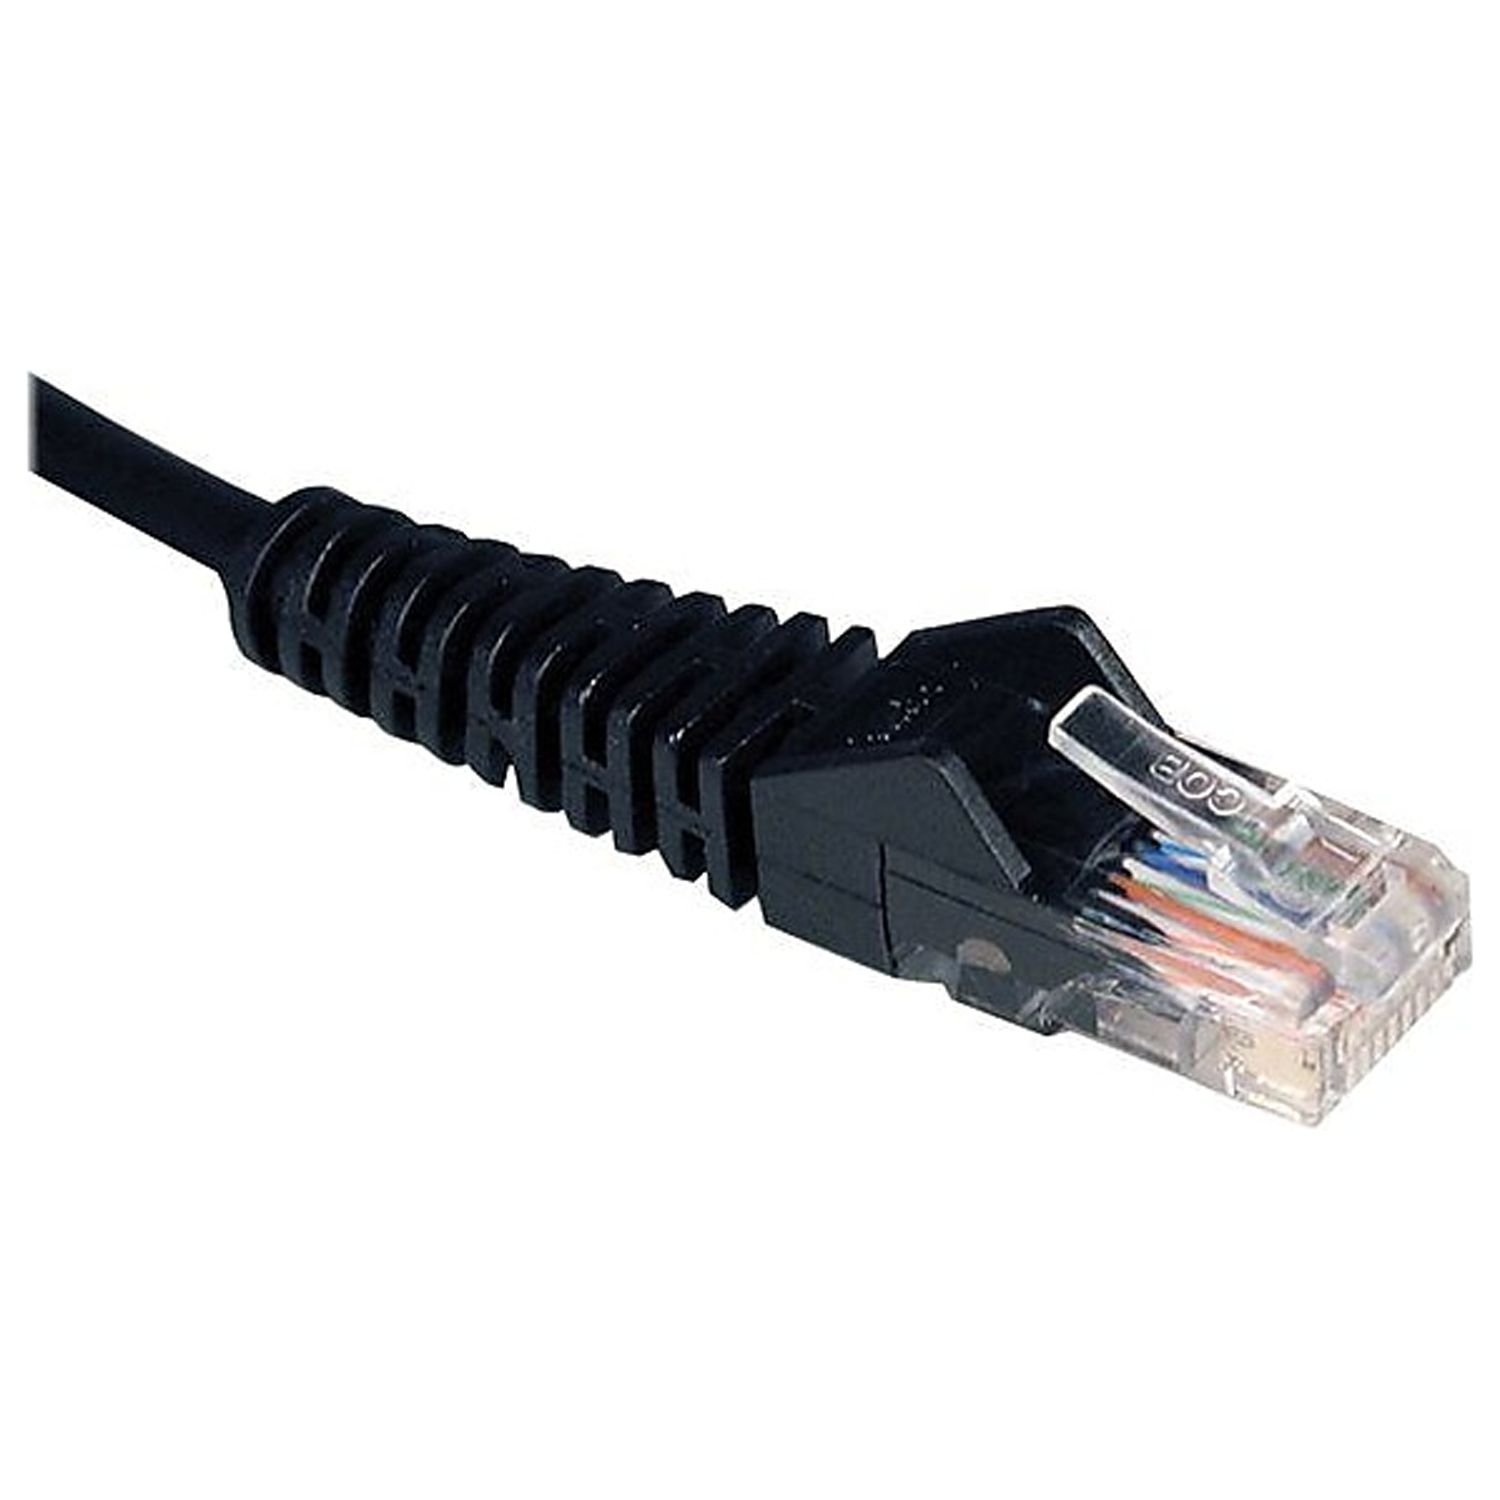 Tripp Lite N001-003-BK Cat5e 350MHz Snagless Molded Patch Network Cable (RJ45 M/M) - Black, 3-ft. - image 2 of 2